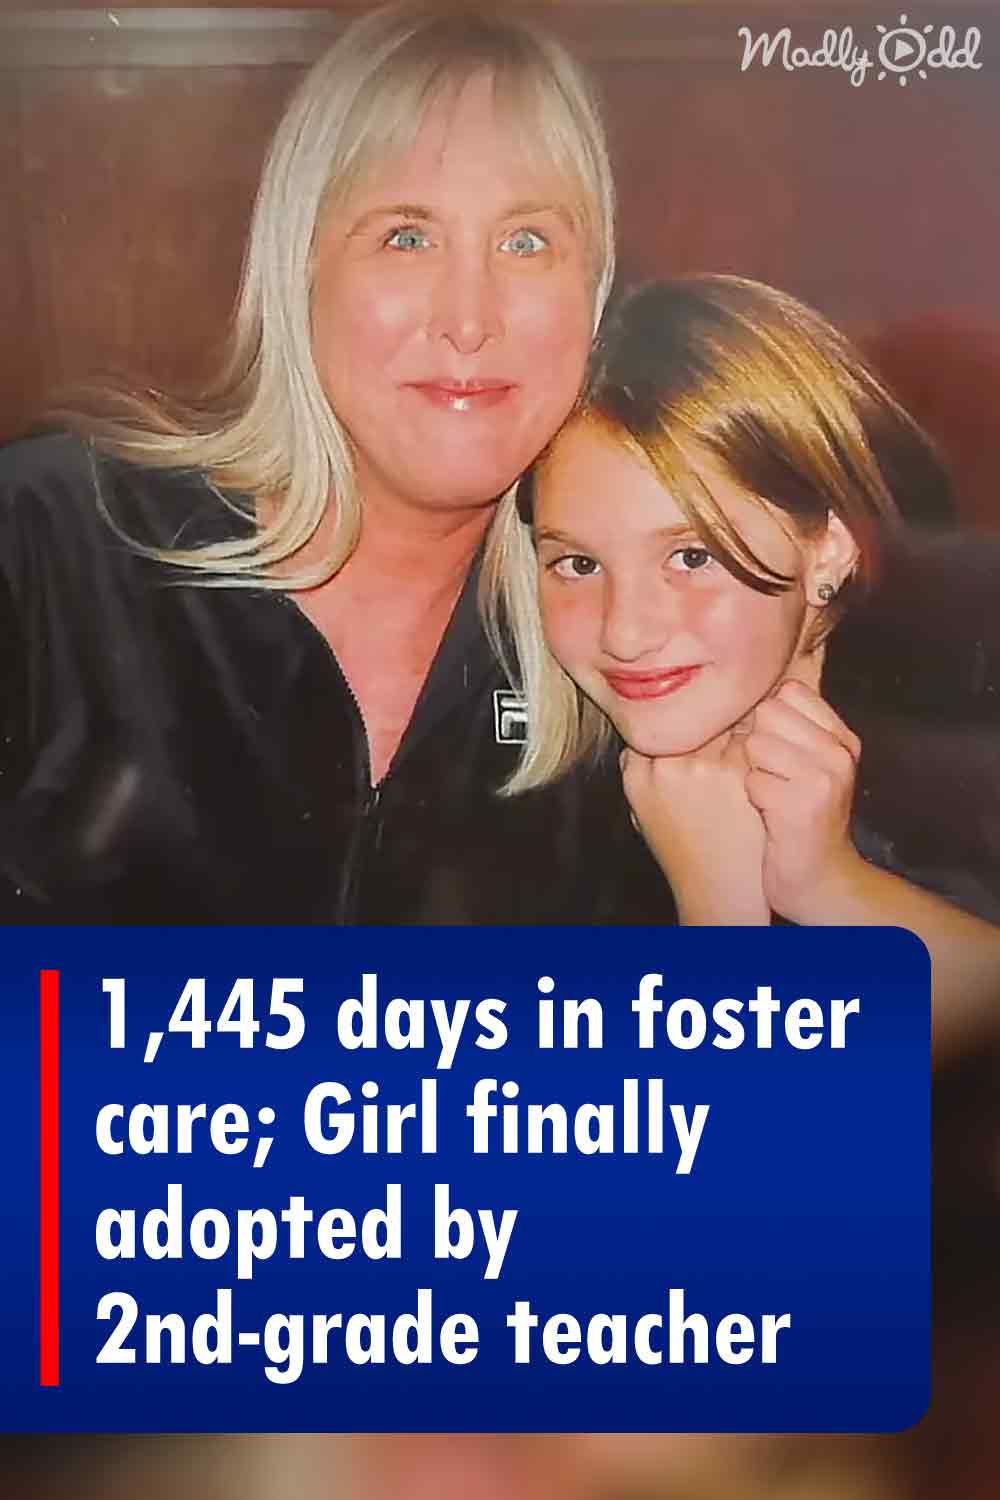 1,445 days in foster care; Girl finally adopted by 2nd-grade teacher